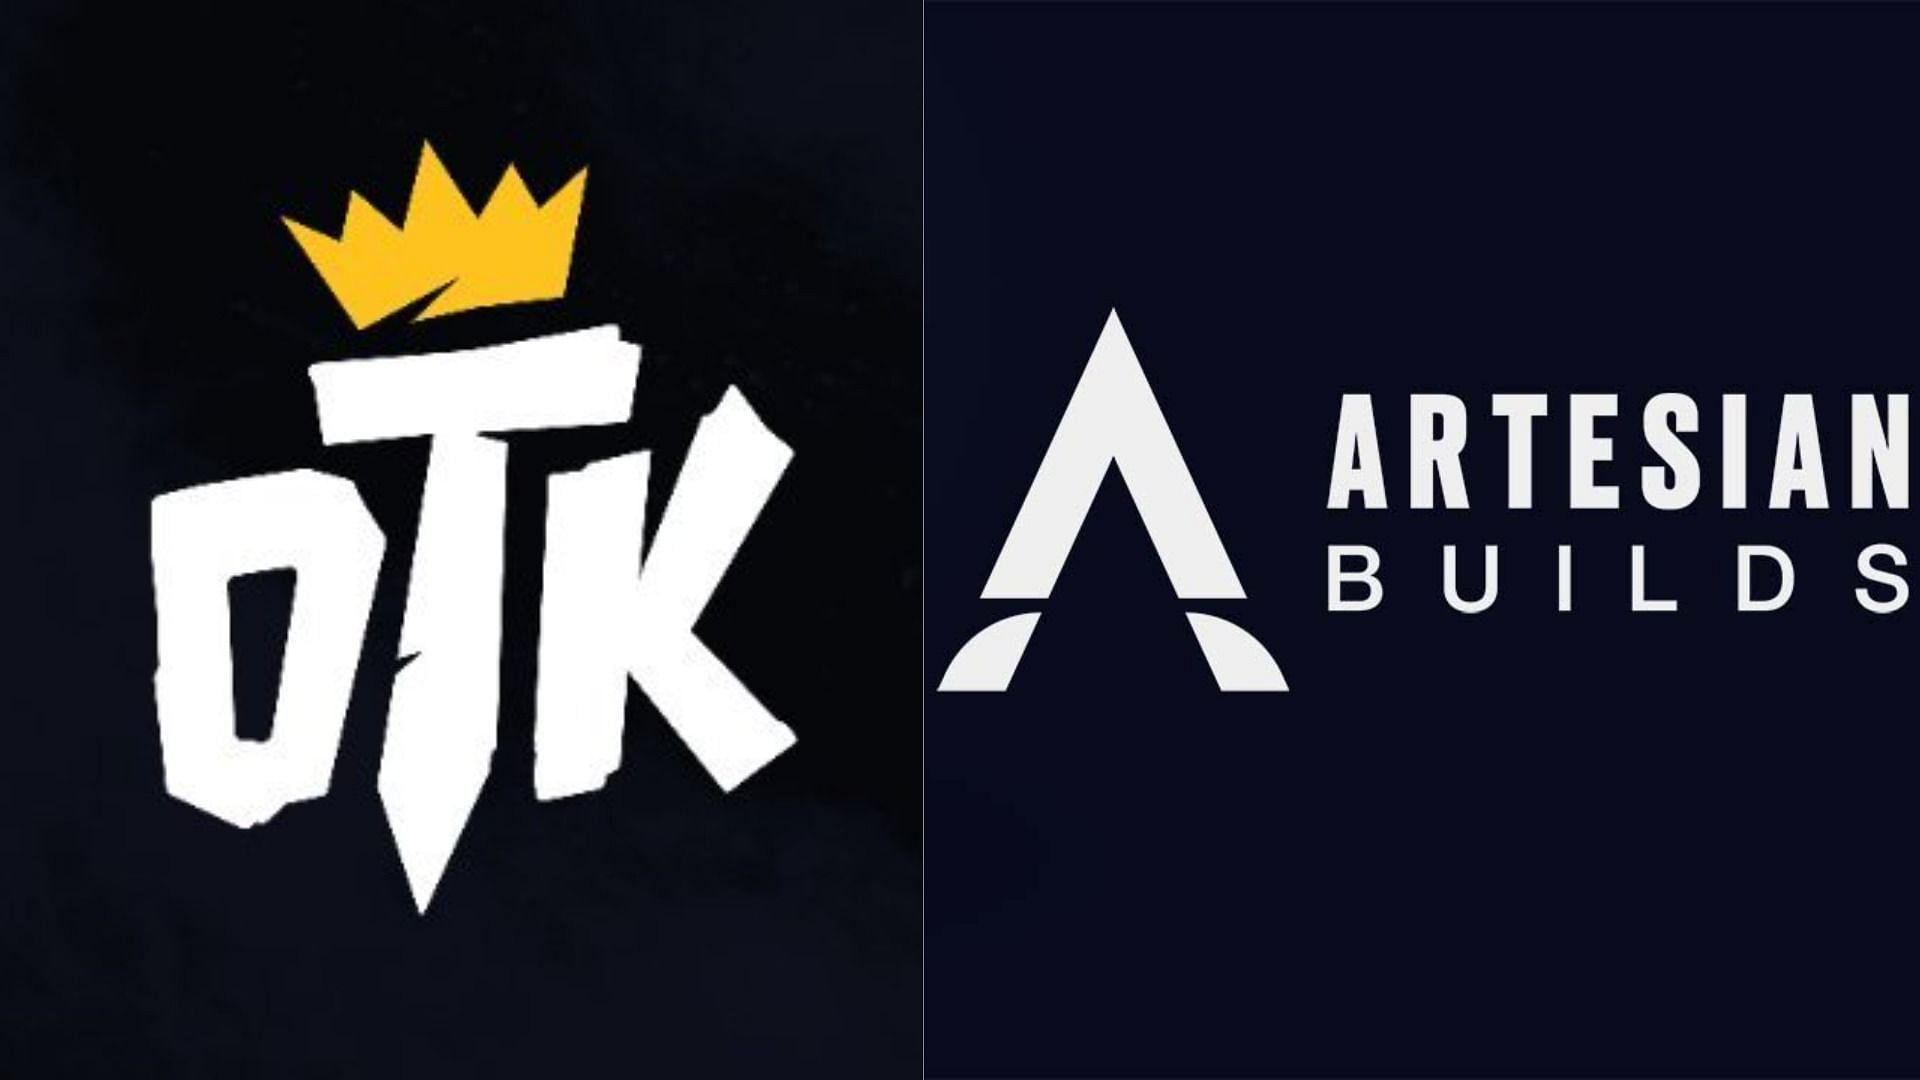 OTK announced on Twitter that they will no longer be working with PC building company Artesian Builds (Image via Sportskeeda)